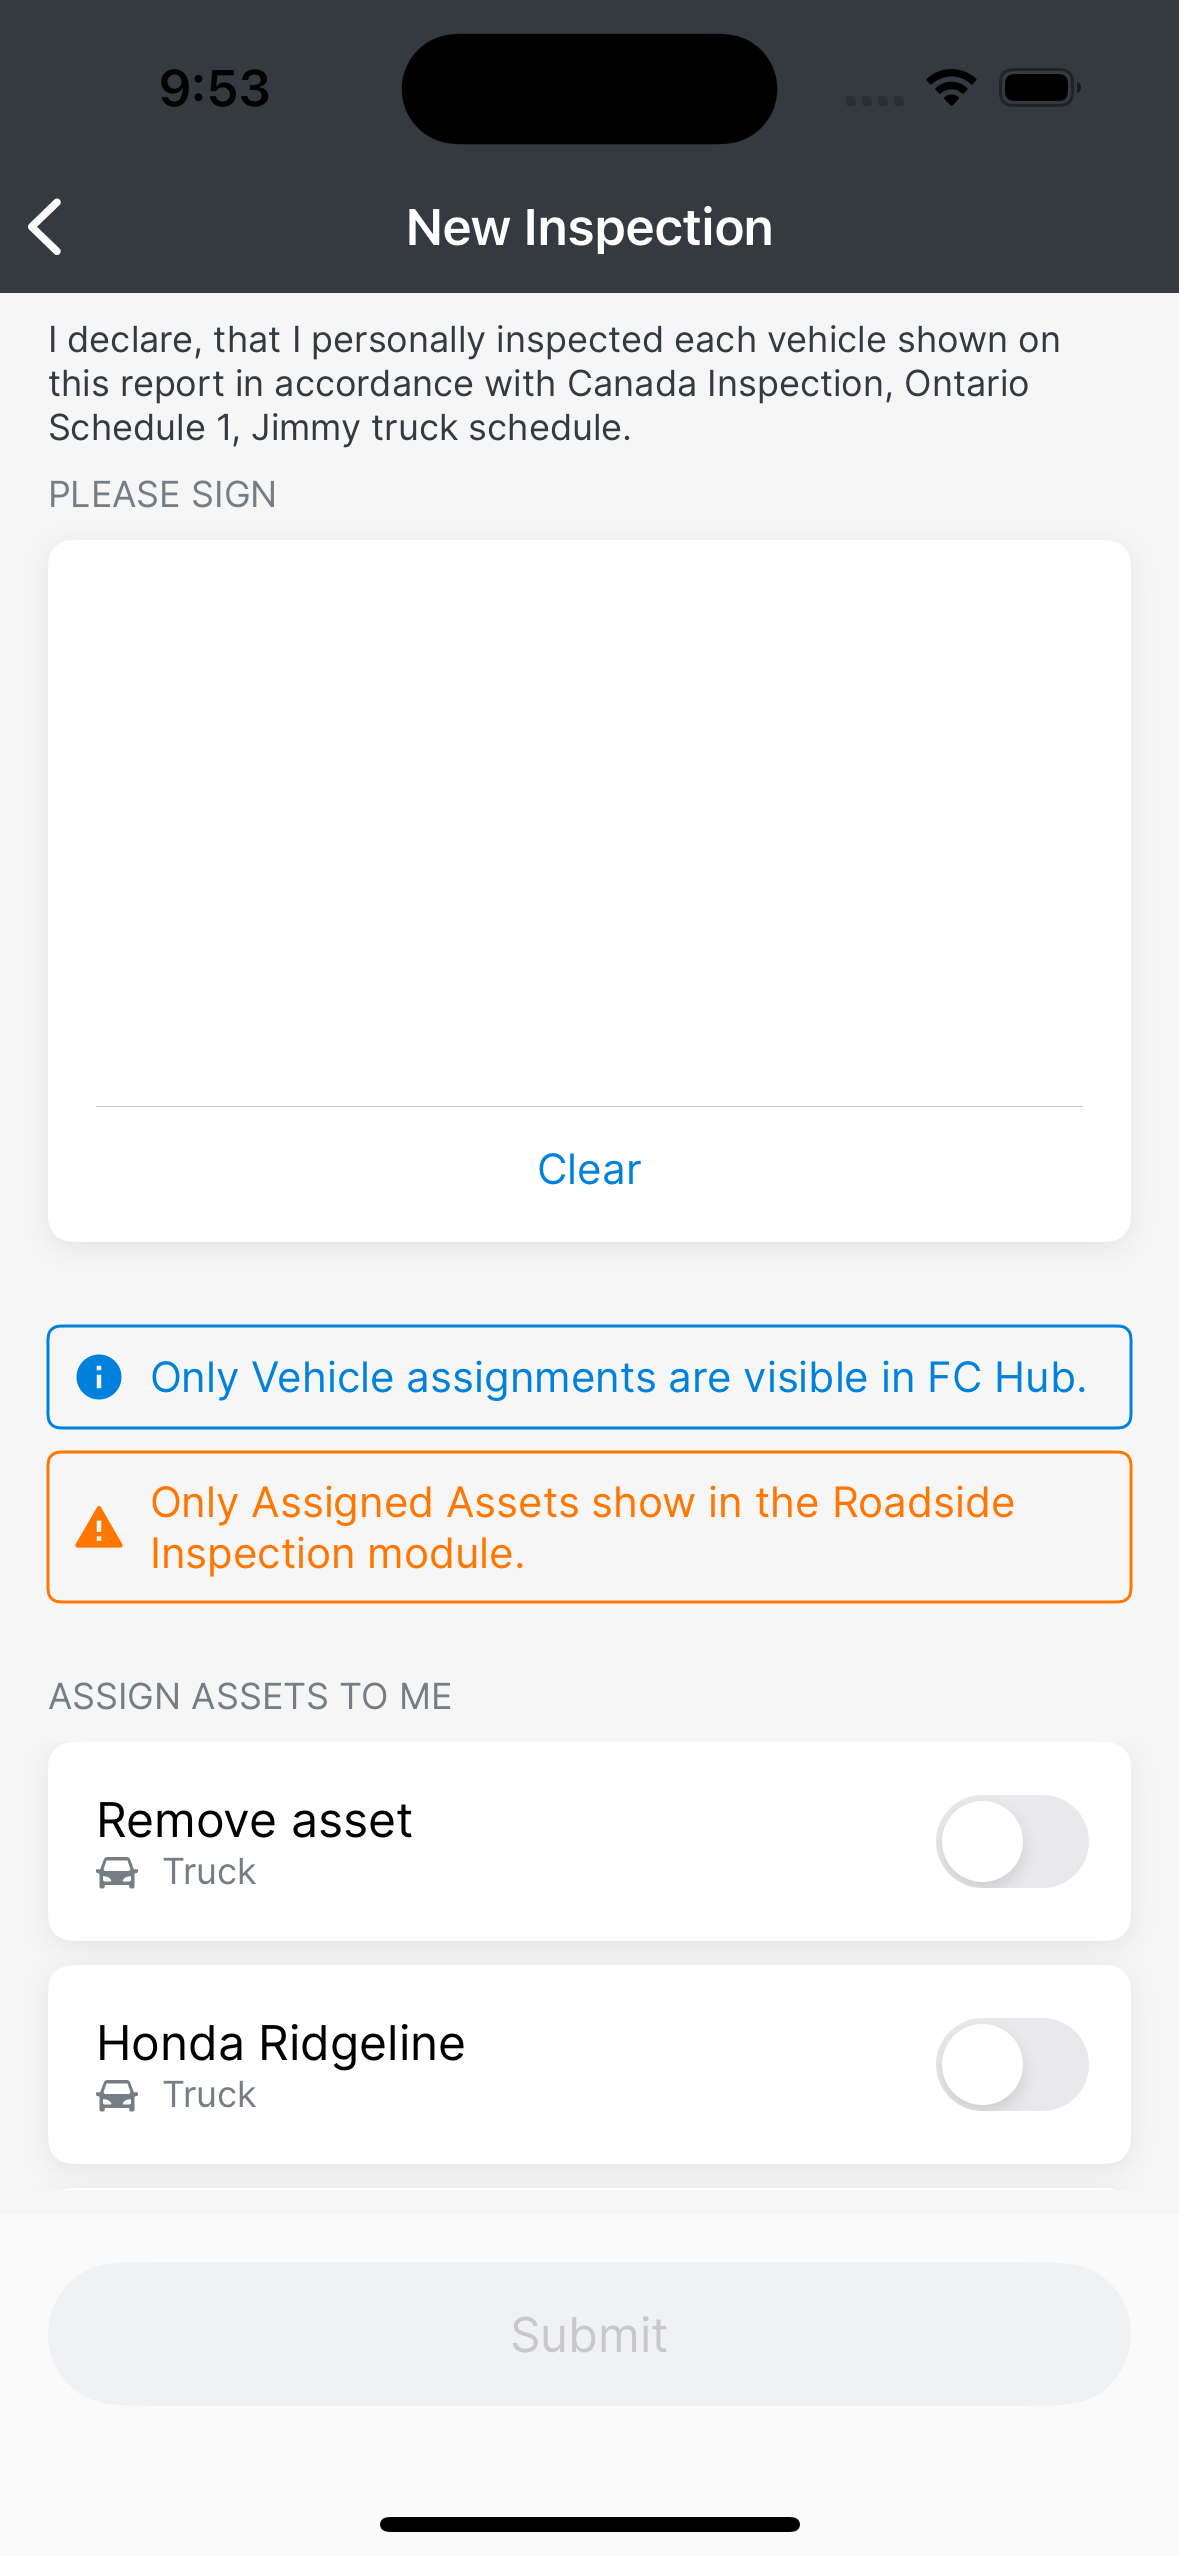 warning message that only assigned assets show in roadside inspection module